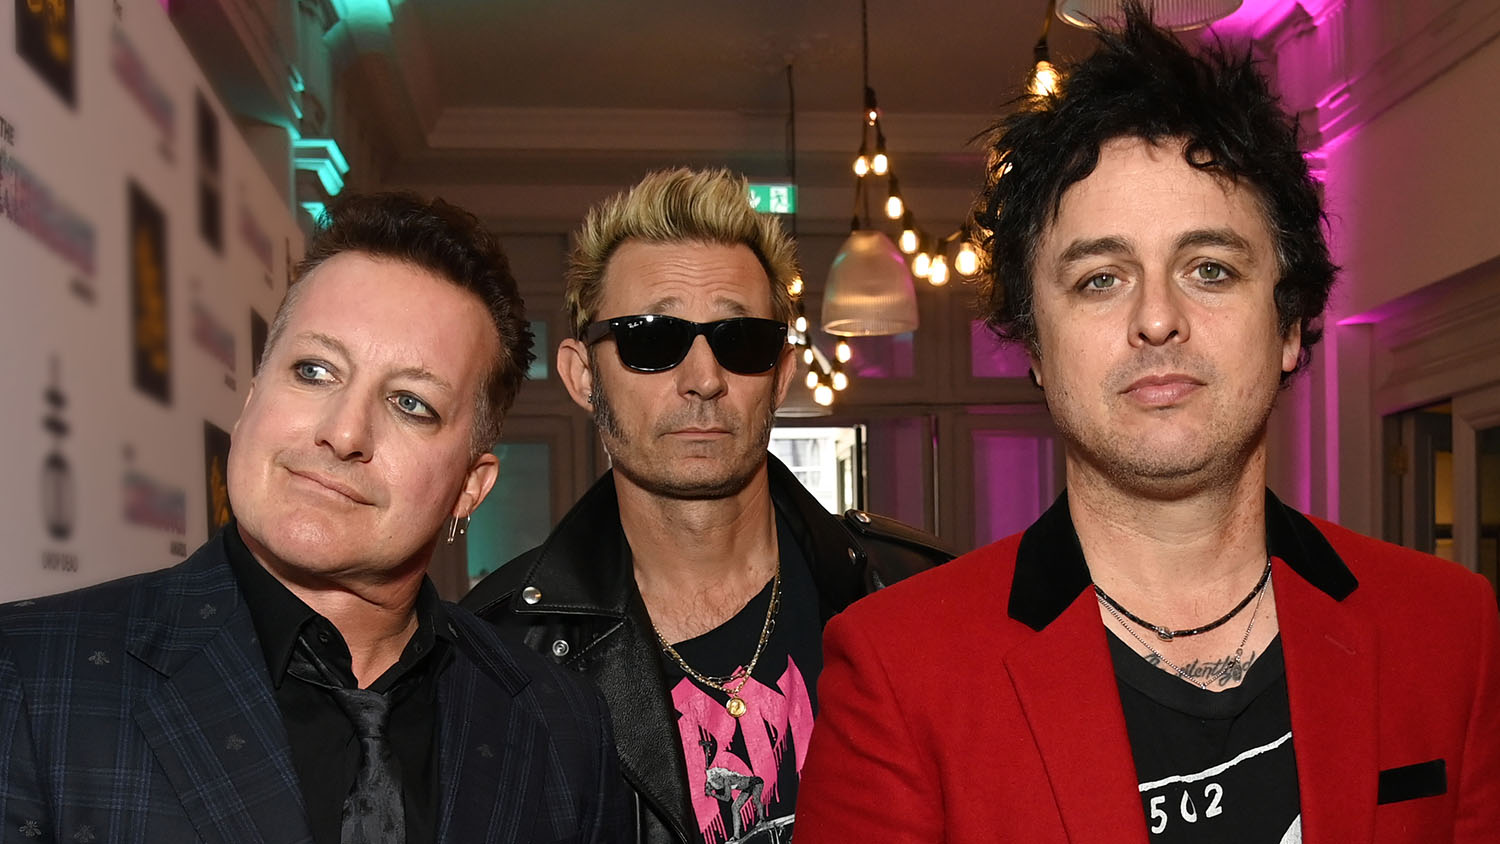 Green Day: Get to know one of punk's biggest bands